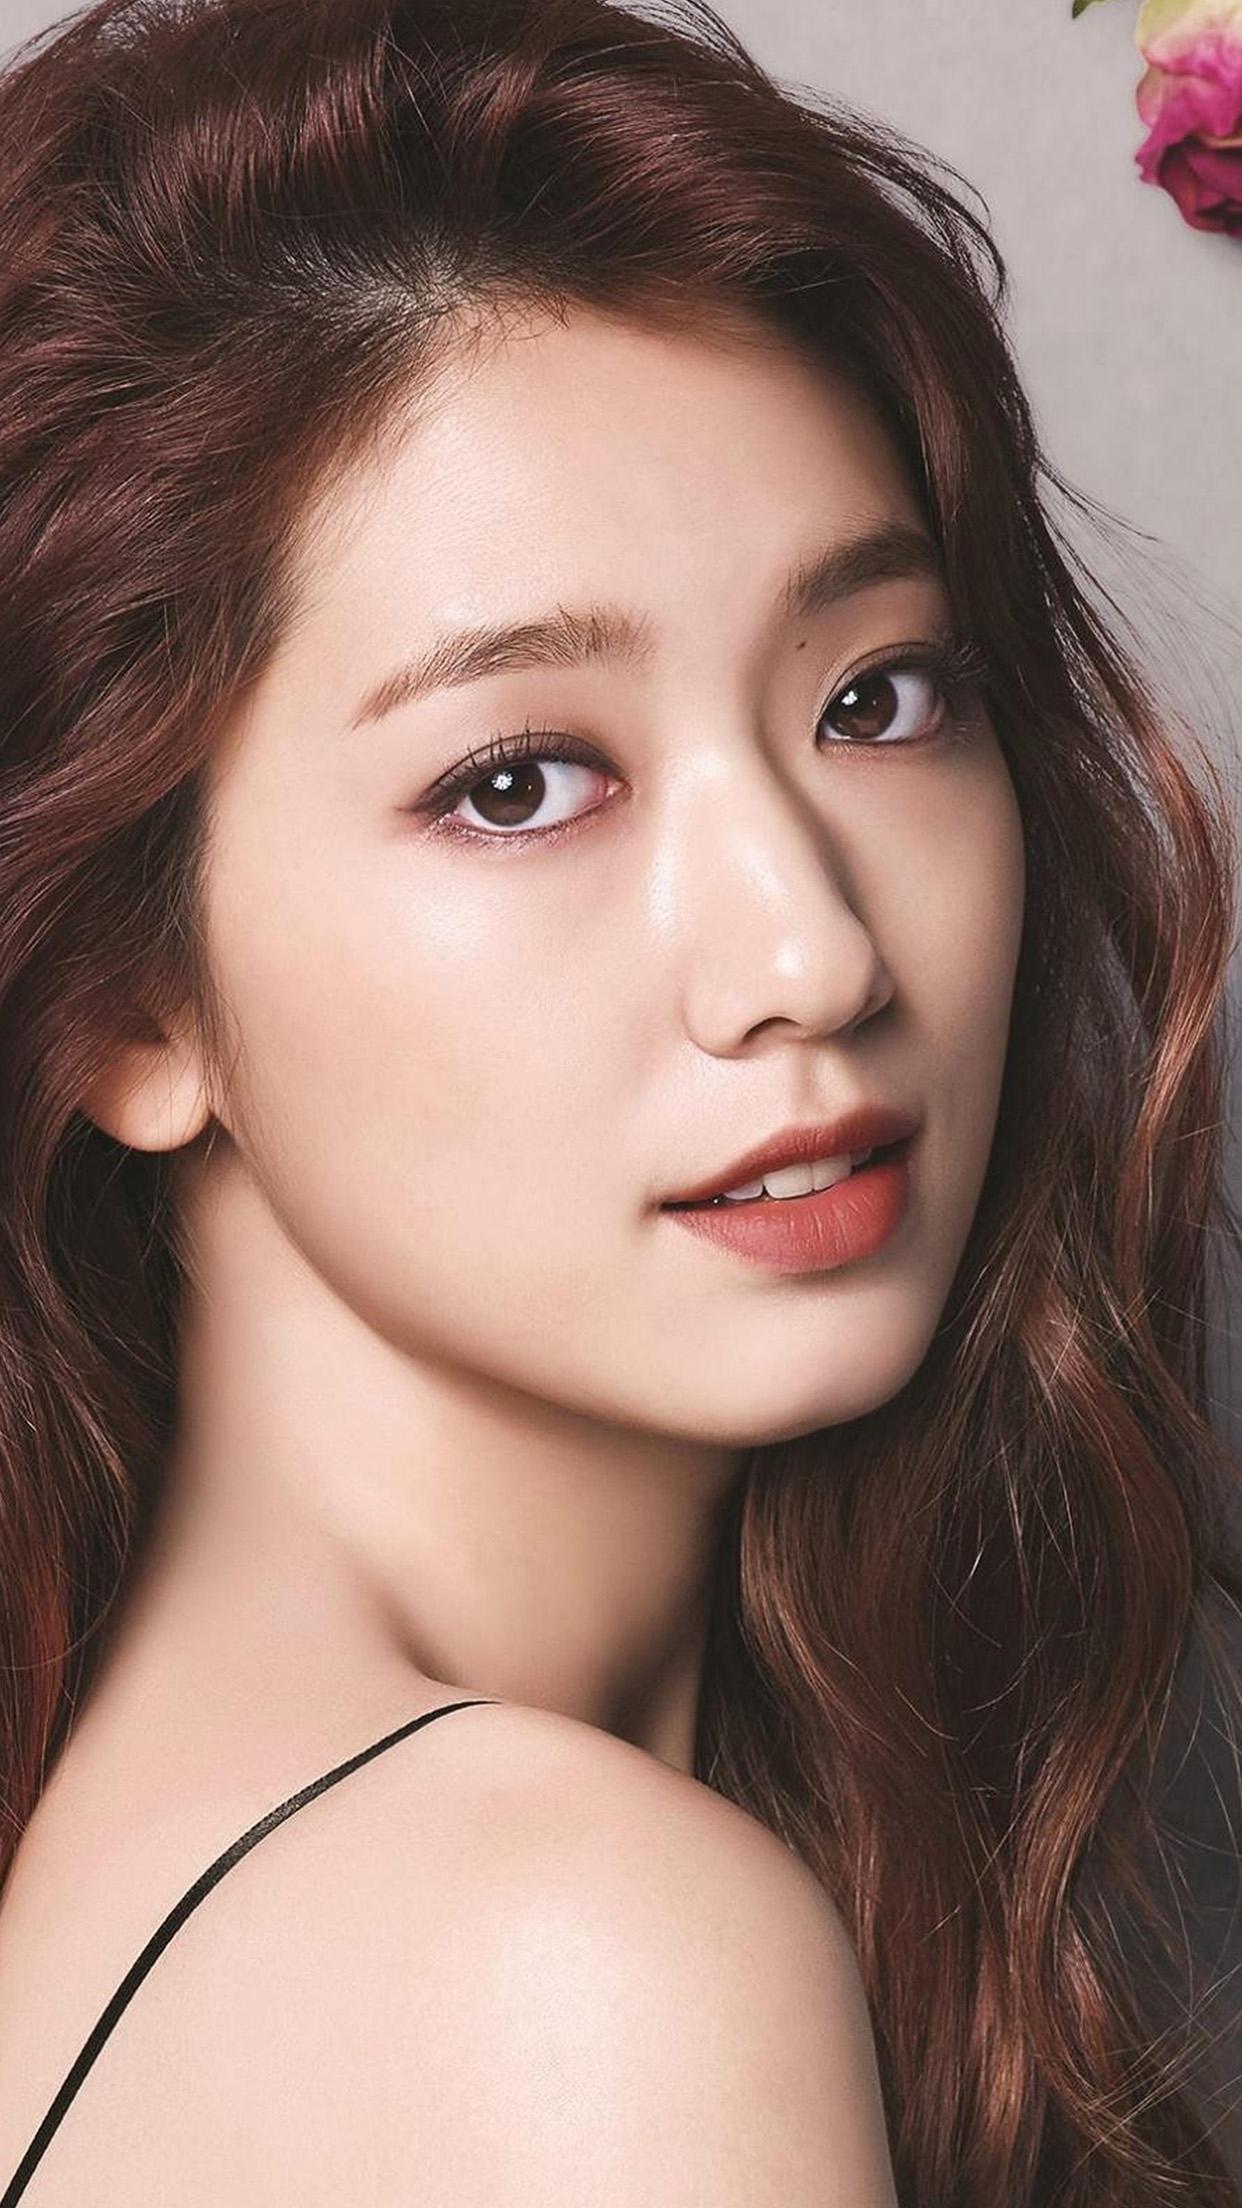 Park Shin Hye iPhone Wallpapers - Wallpaper Cave